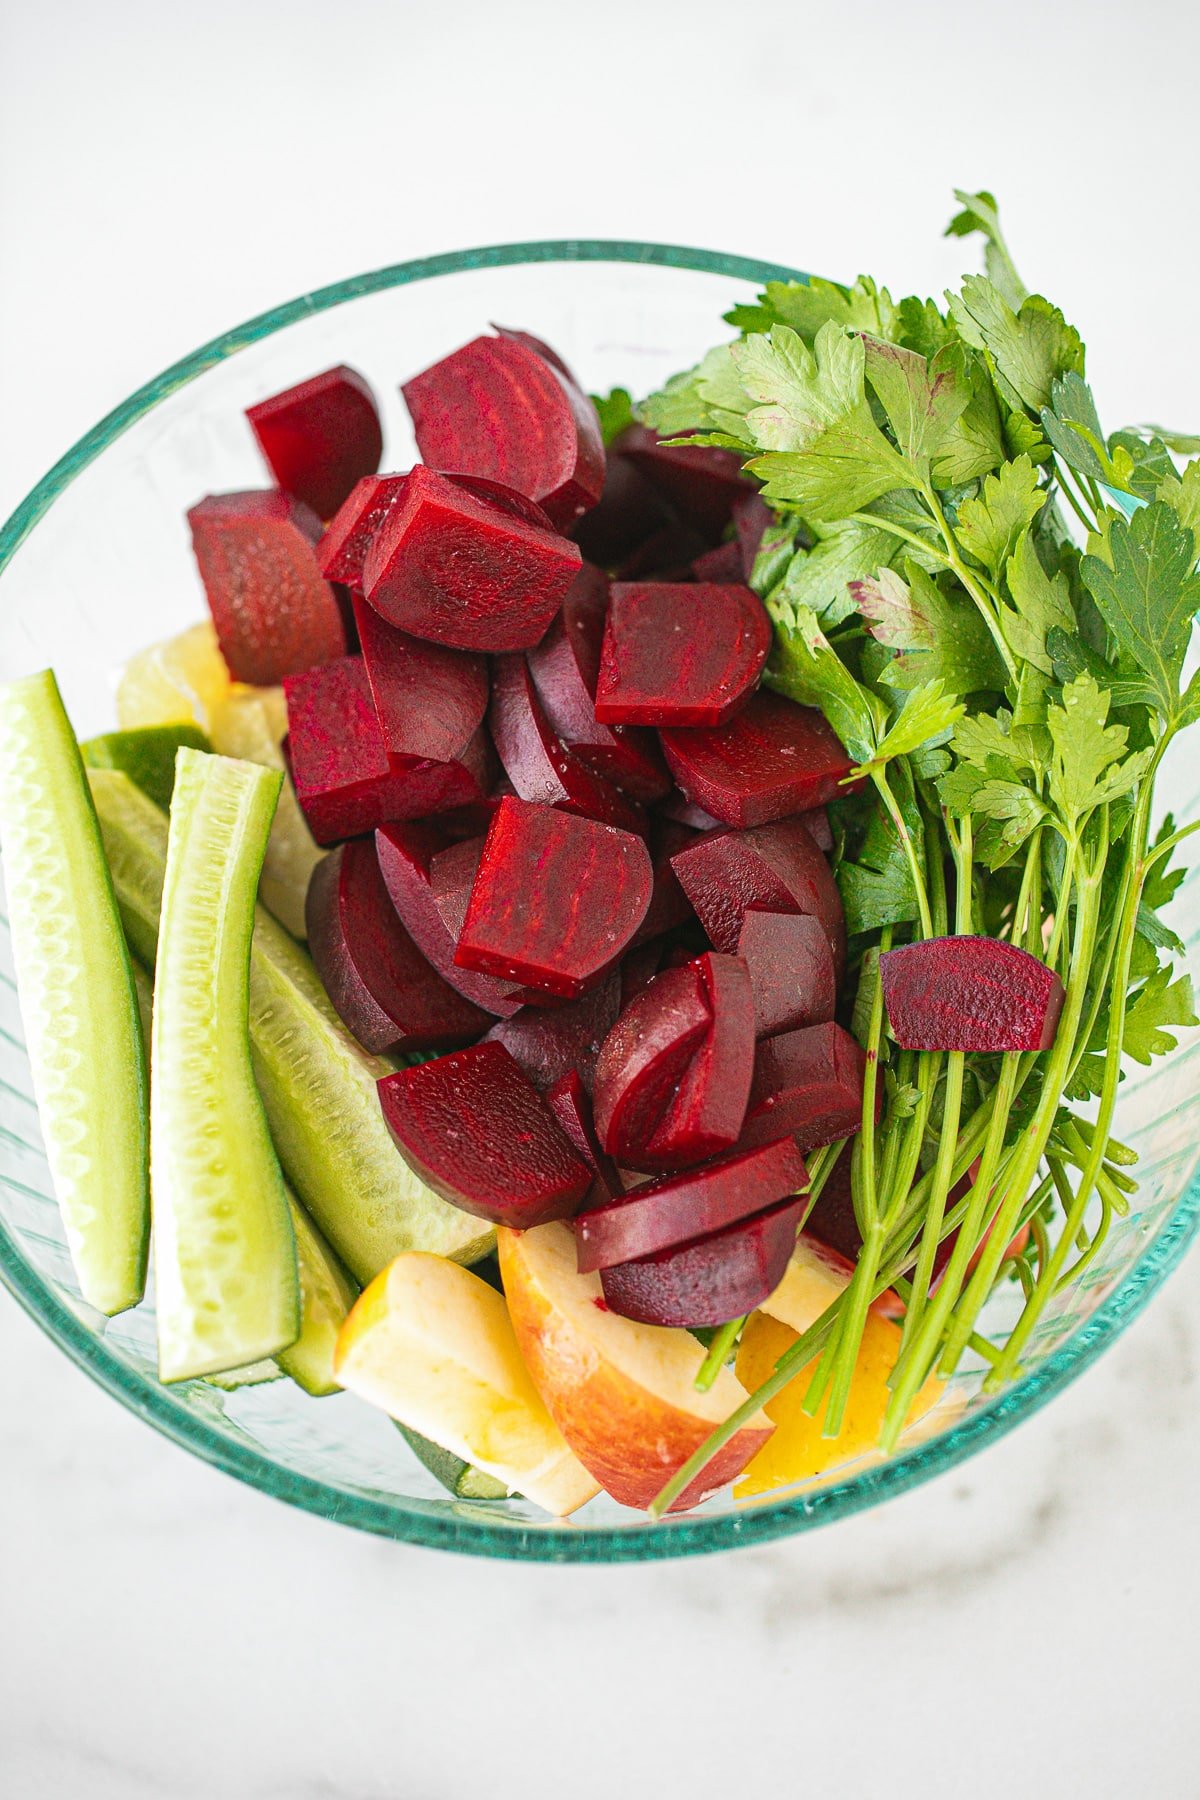 chopped beets and other vegetables in a bowl ready to be juiced.